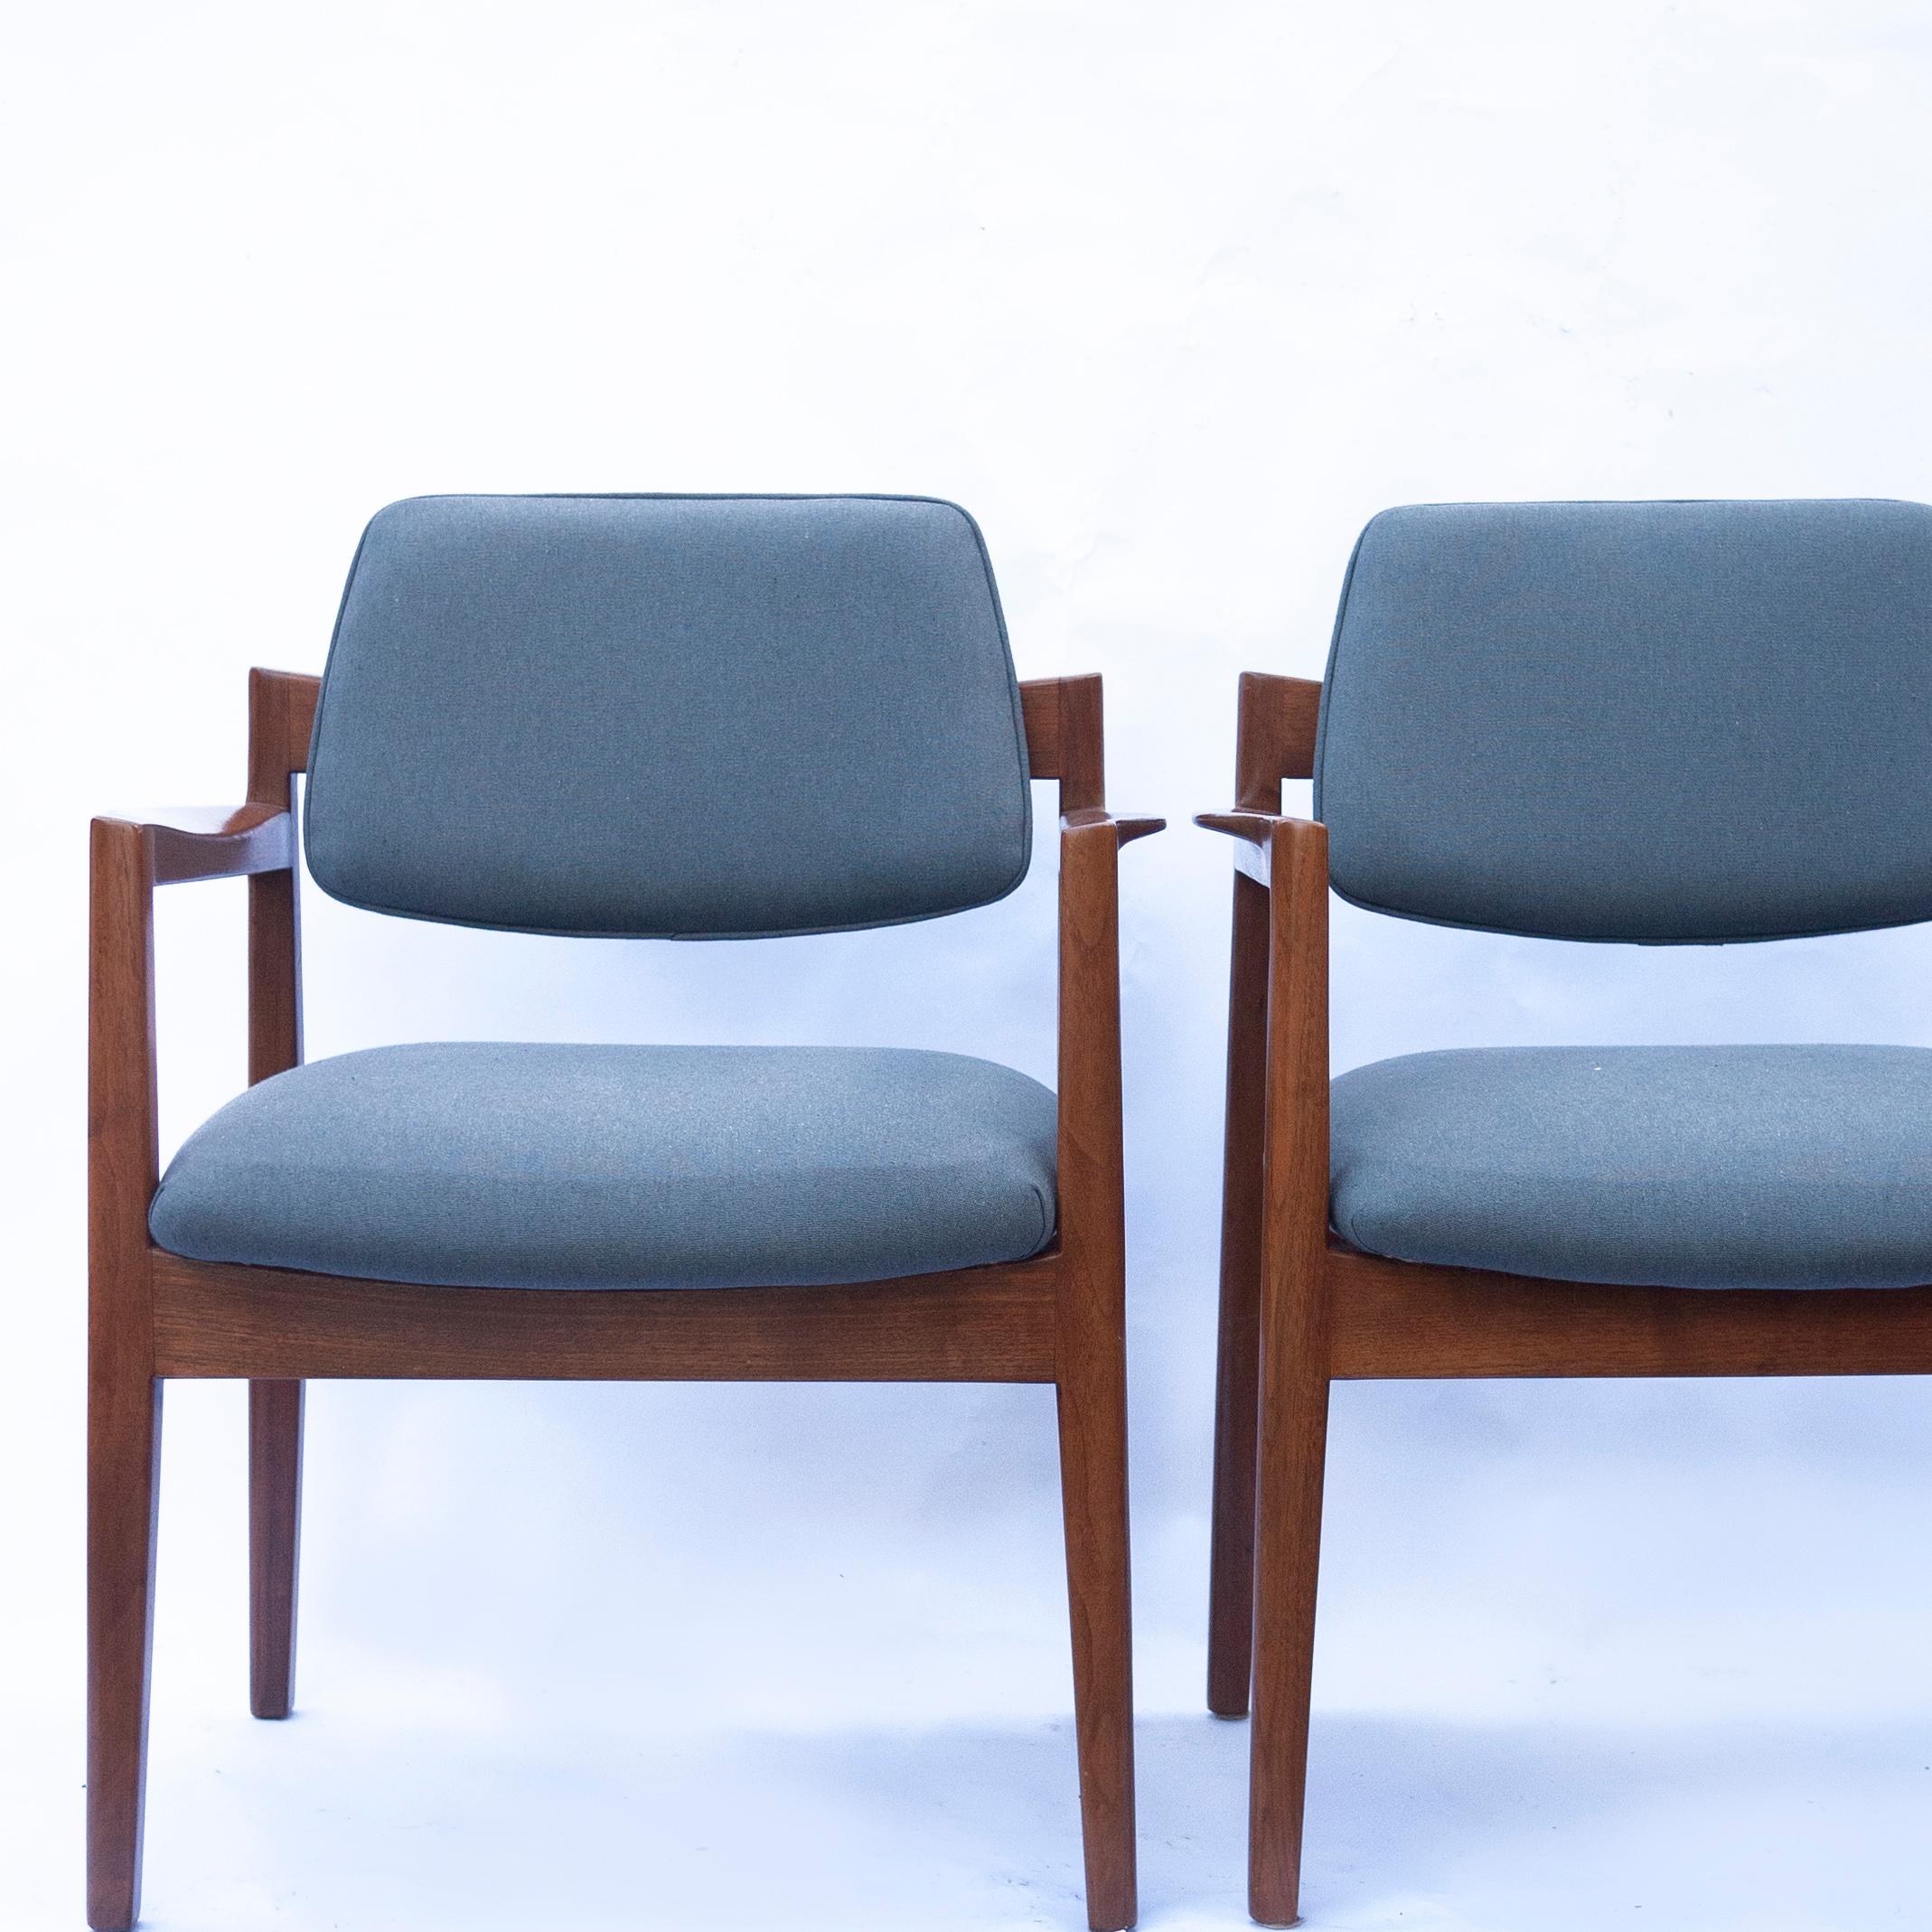 Mid-Century Modern Pair of Arm Chairs by Jens Risom for Knoll in Walnut and Newly Upholstered  For Sale